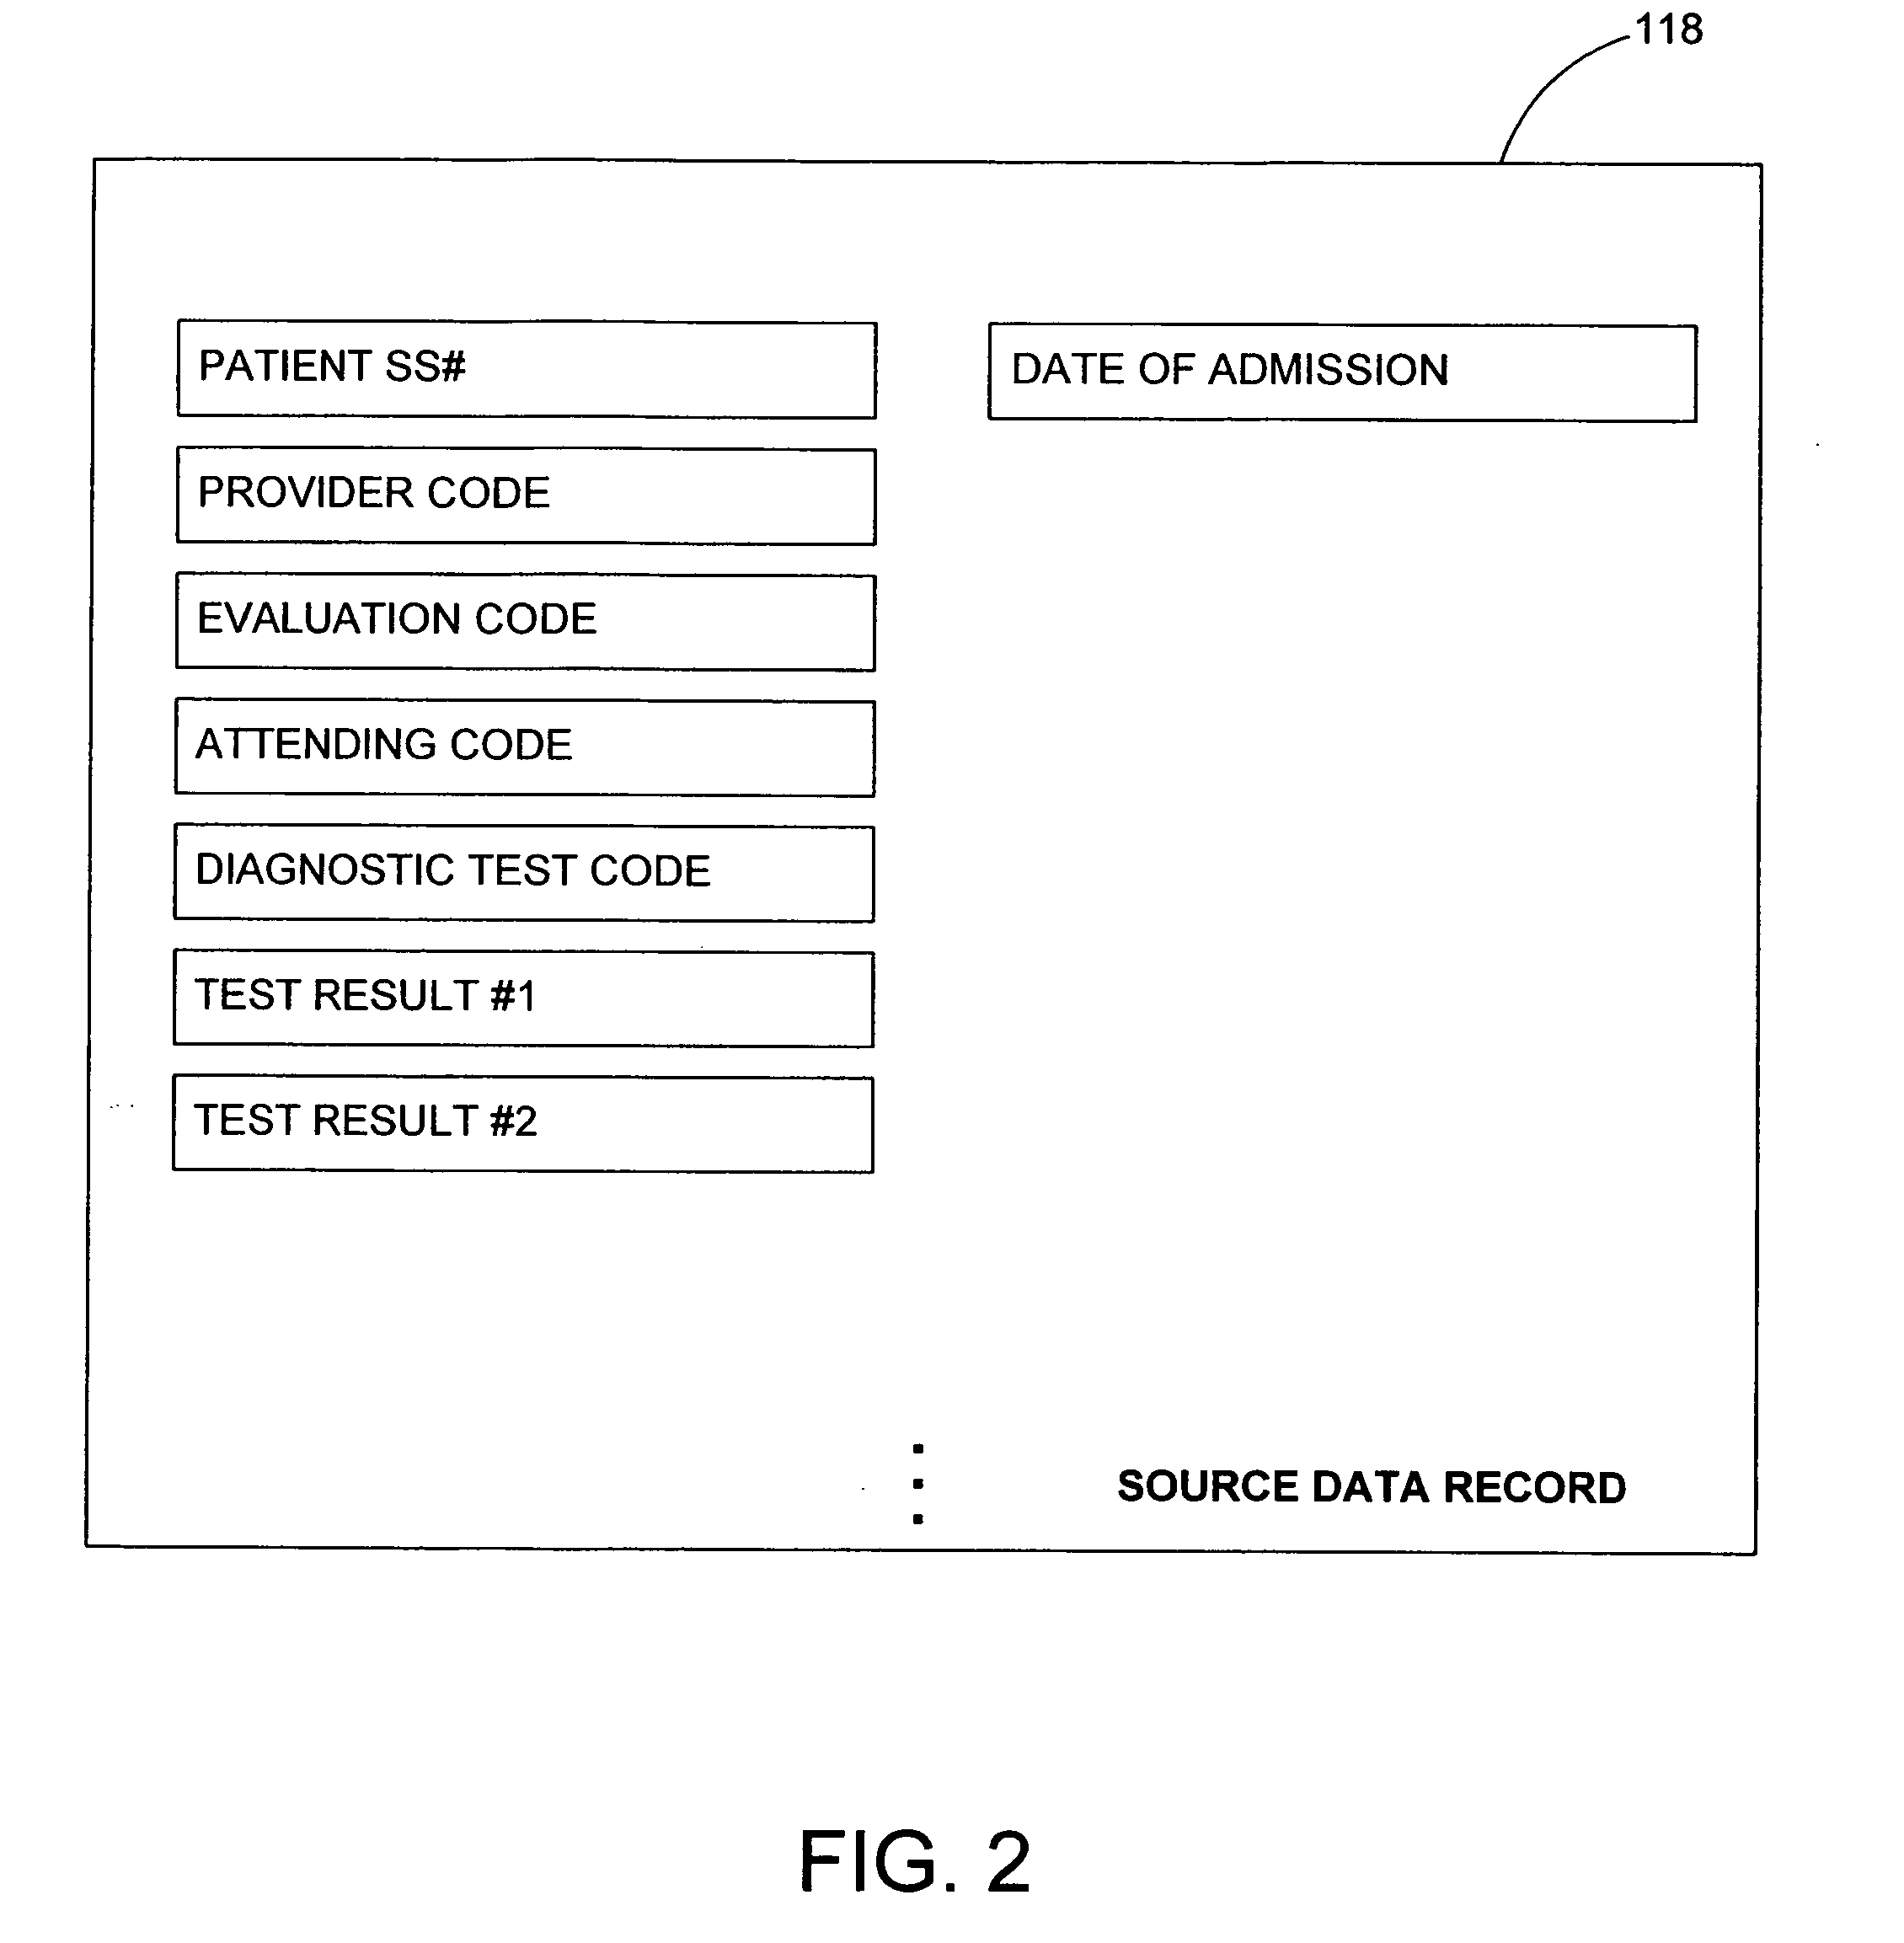 System and method for multidimensional extension of database information using inferred groupings